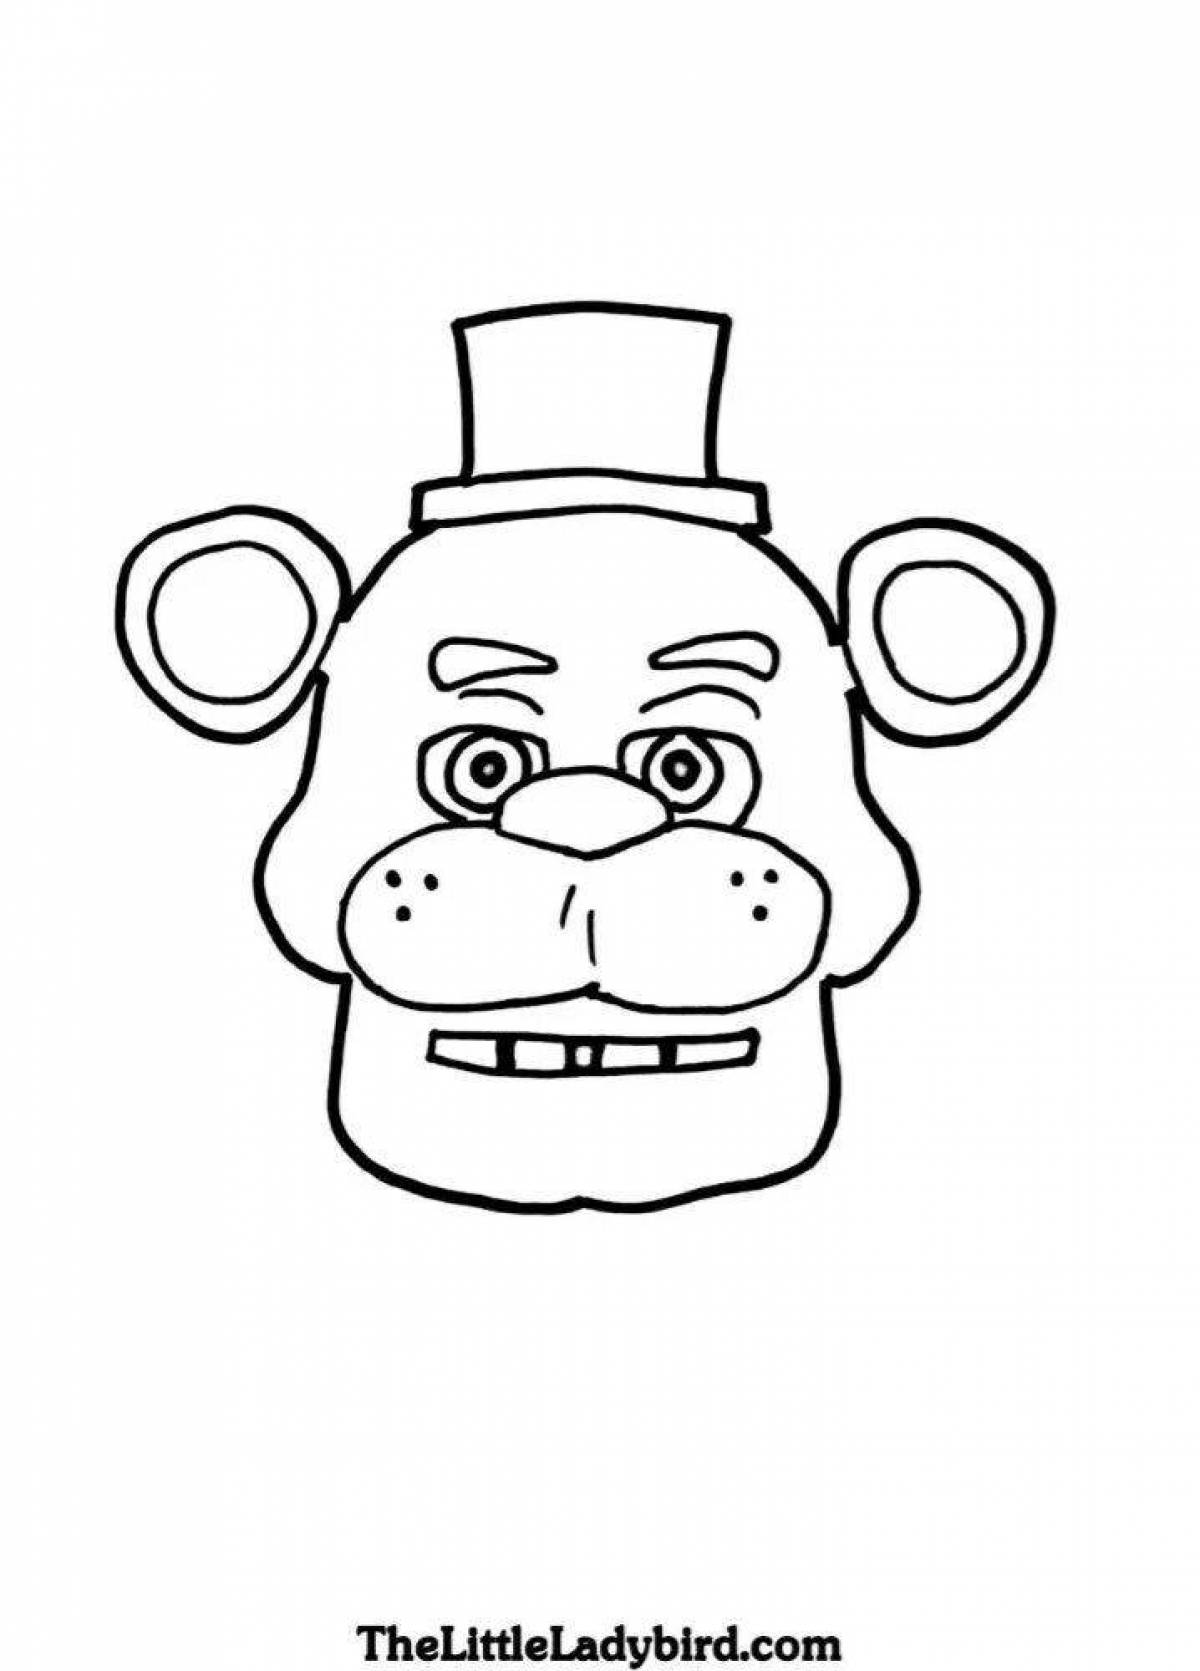 Golden freddy's playful coloring